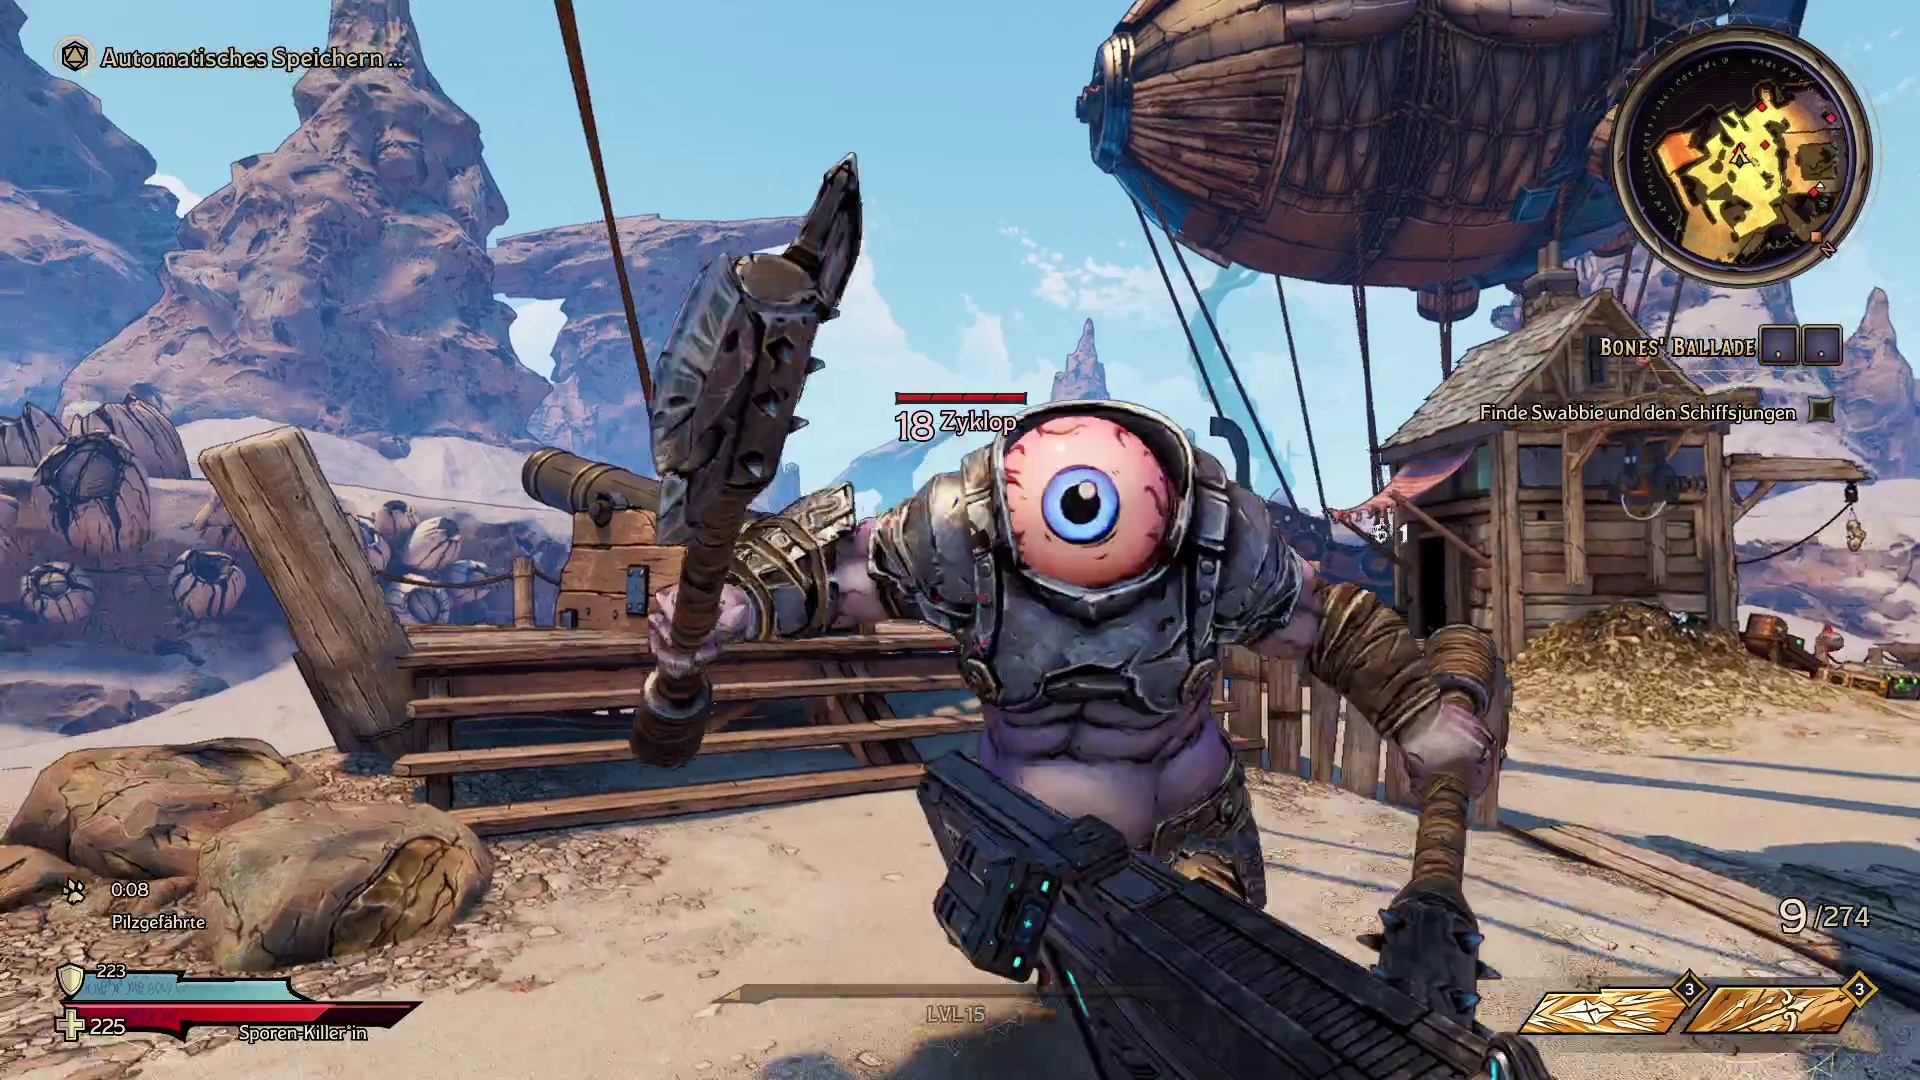 These Cyclops are pretty reminiscent of the Goliaths from Borderlands 2 and 3.